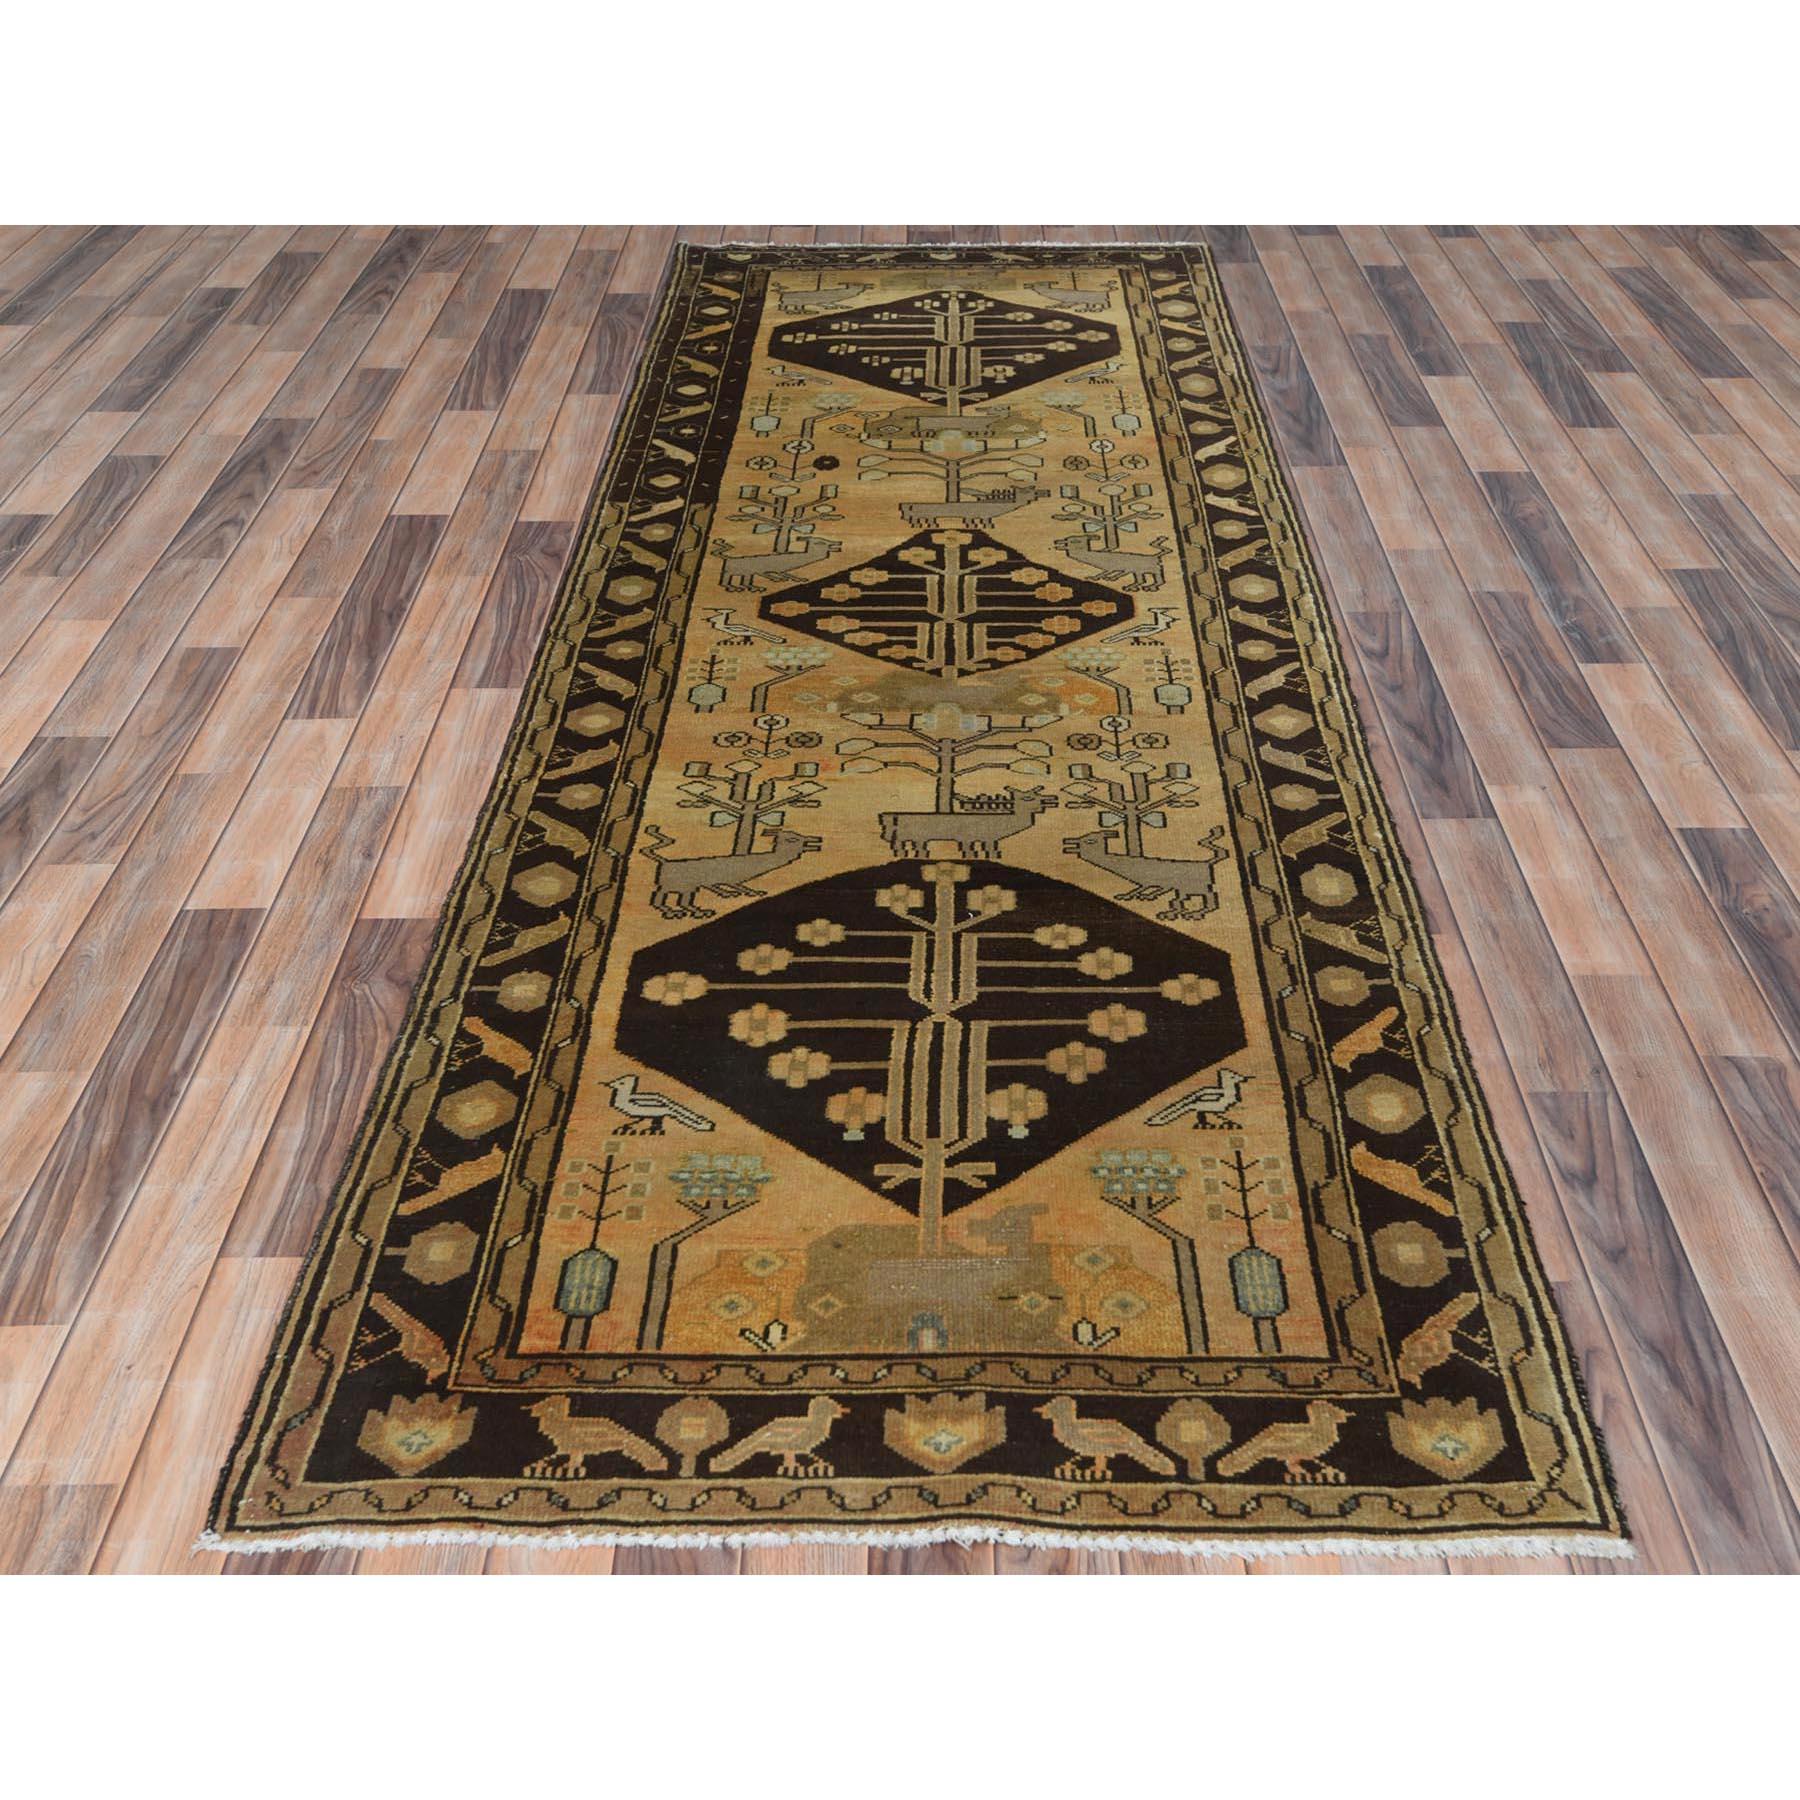 This fabulous hand-knotted carpet has been created and designed for extra strength and durability. This rug has been handcrafted for weeks in the traditional method that is used to make
Exact Rug Size in Feet and Inches : 3'7